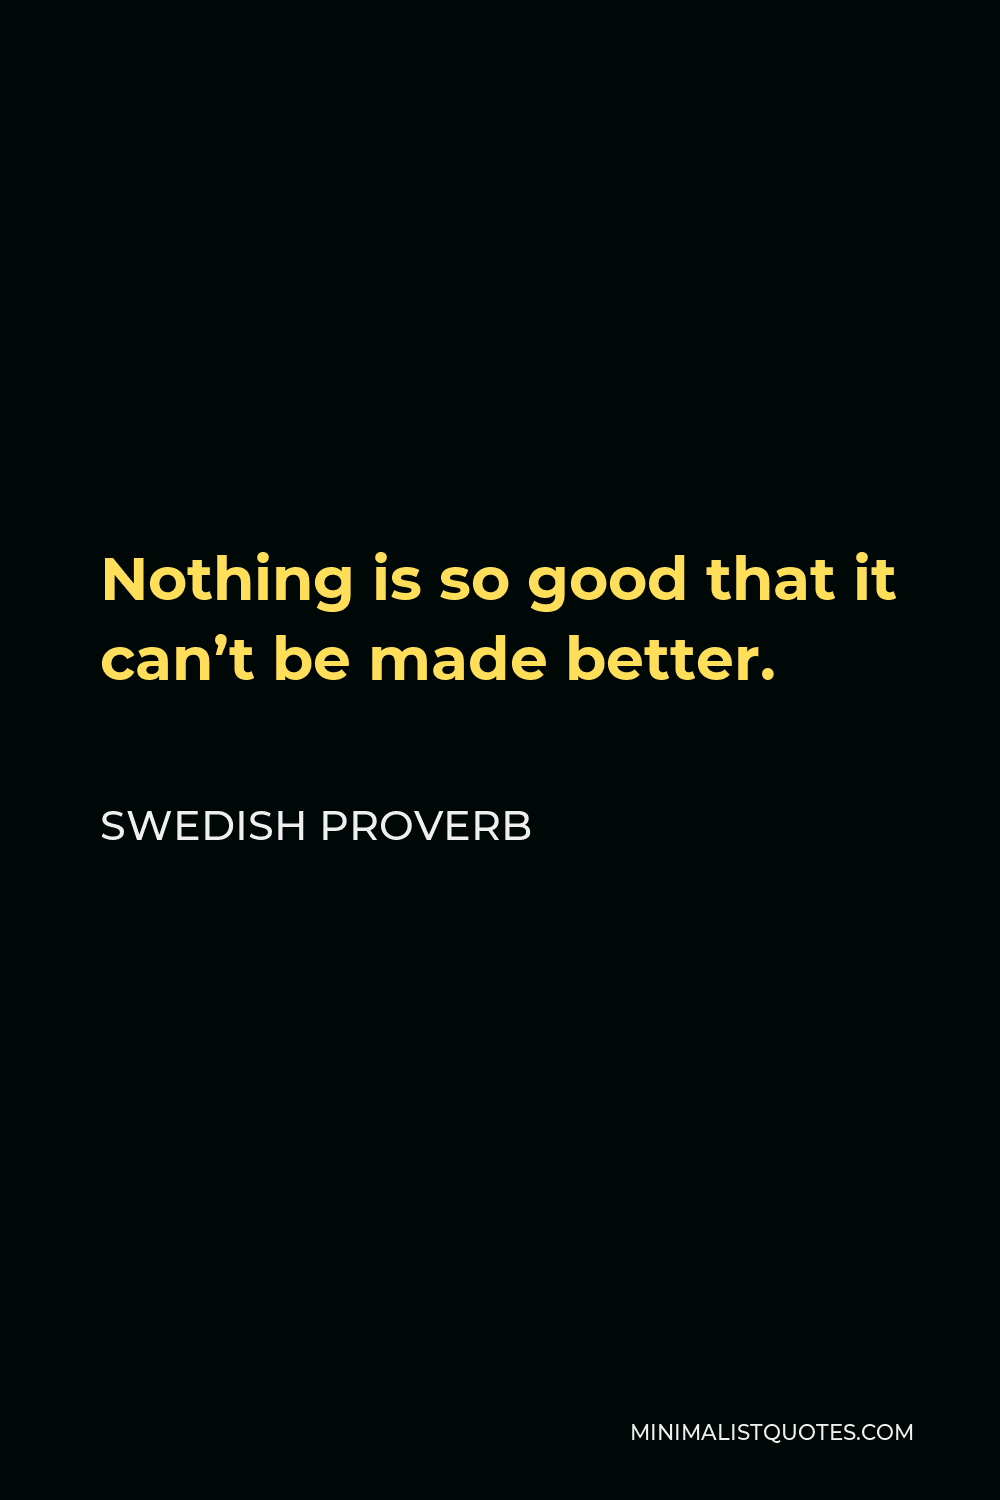 Swedish Proverb Quote - Nothing is so good that it can’t be made better.